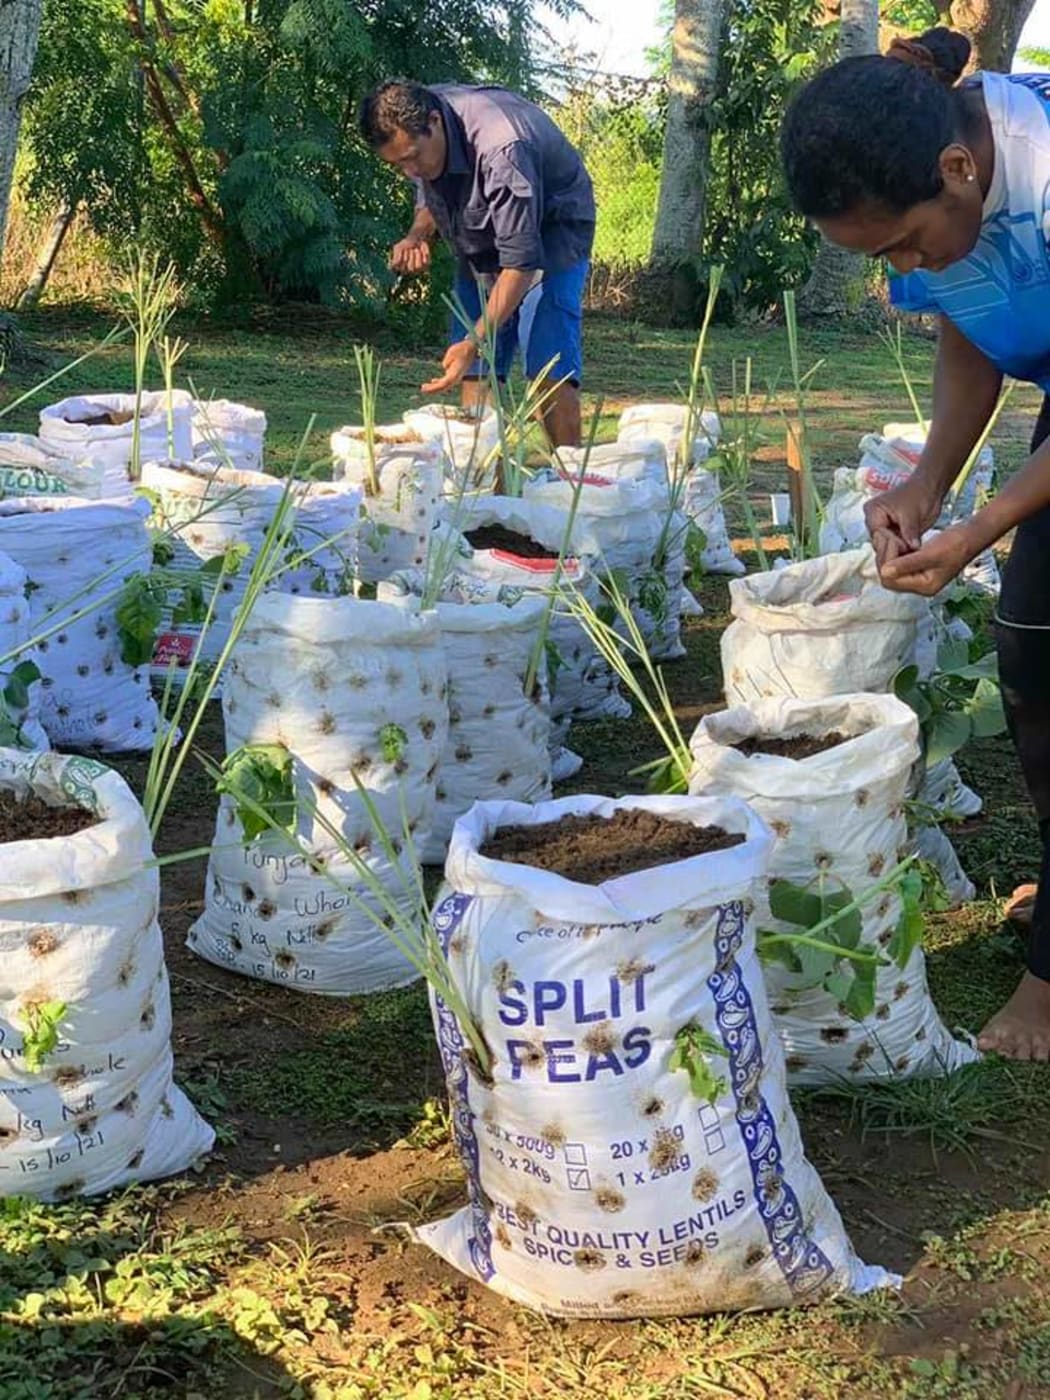 Sack gardens for Nadi where low lying communities have been struggling to grow food in the floods. Each sack has eight types of crops to ensure nutrition diversity.